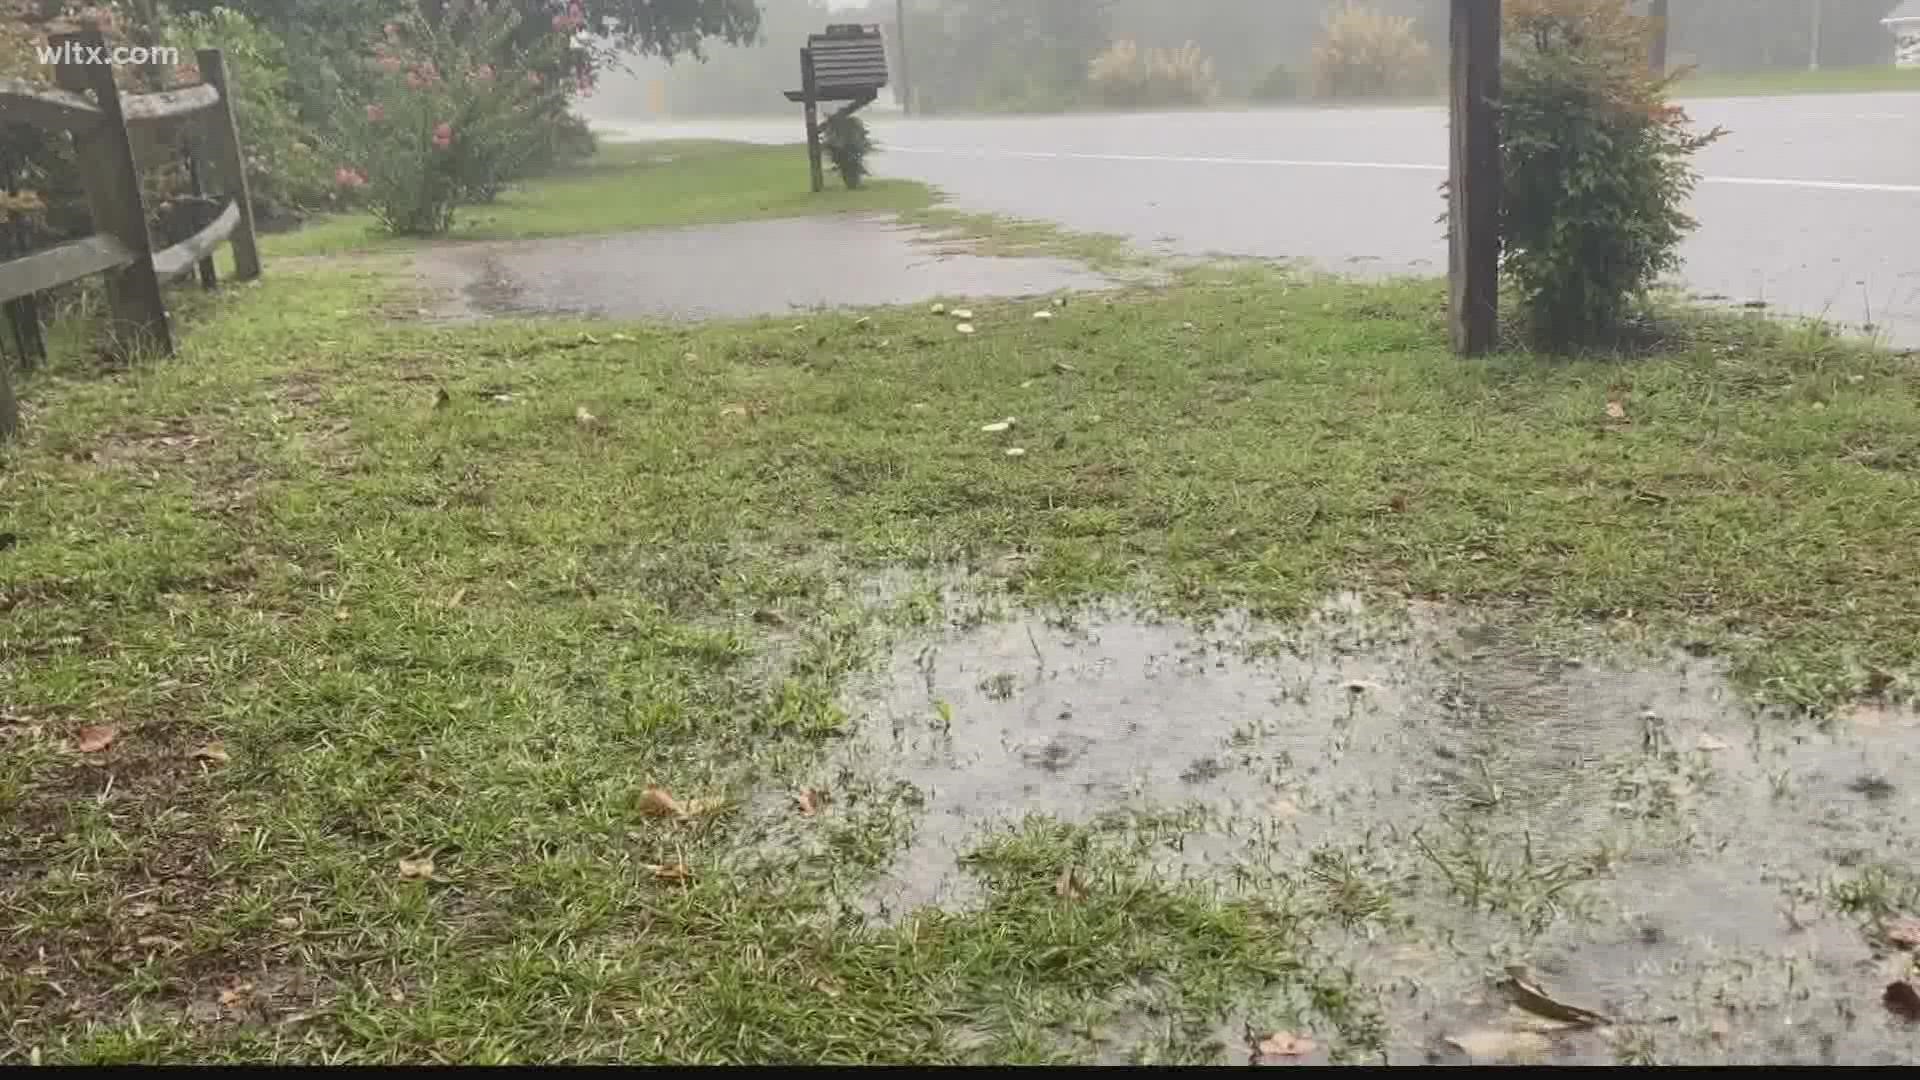 Drainage studies are being done throughout Orangeburg County. This comes as residents complain of dealing with flooding issues every time it rains.